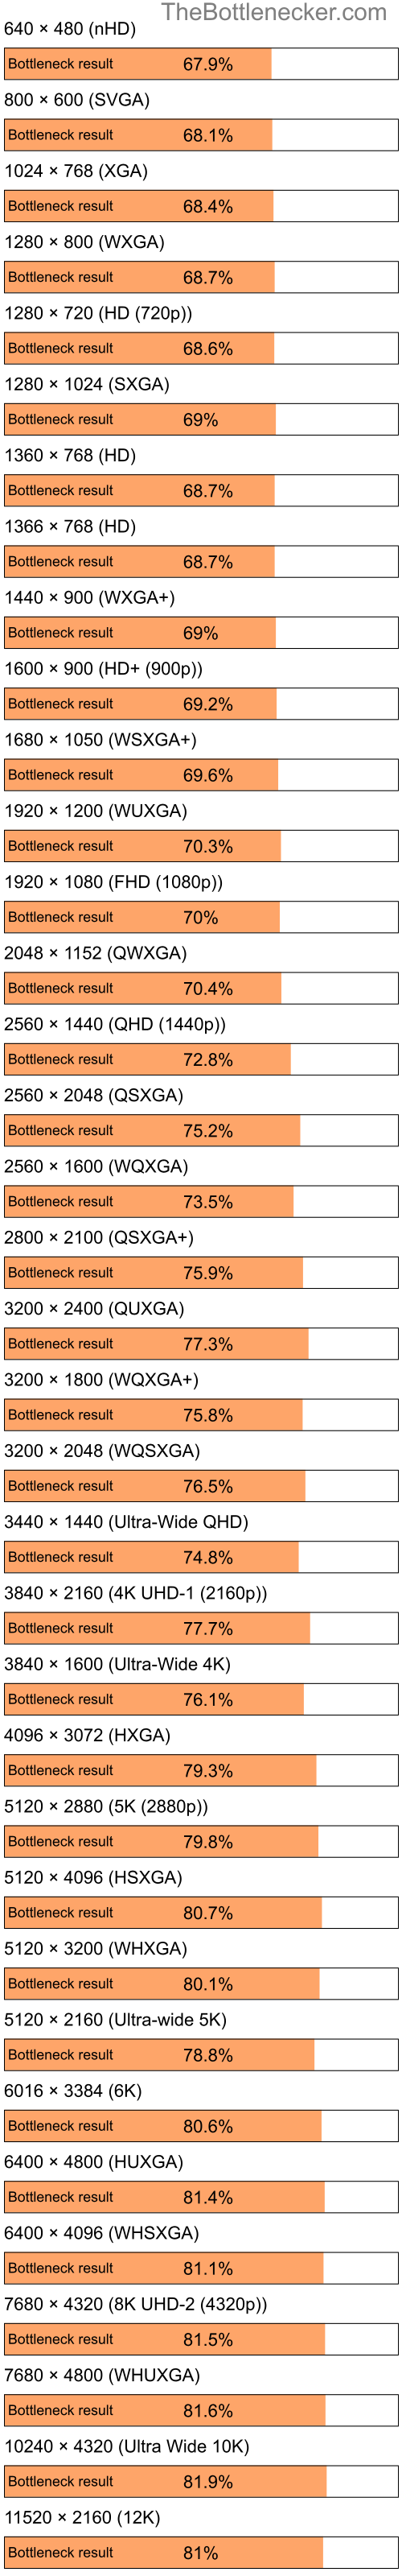 Bottleneck results by resolution for Intel Celeron and AMD Radeon HD 7290 in Graphic Card Intense Tasks